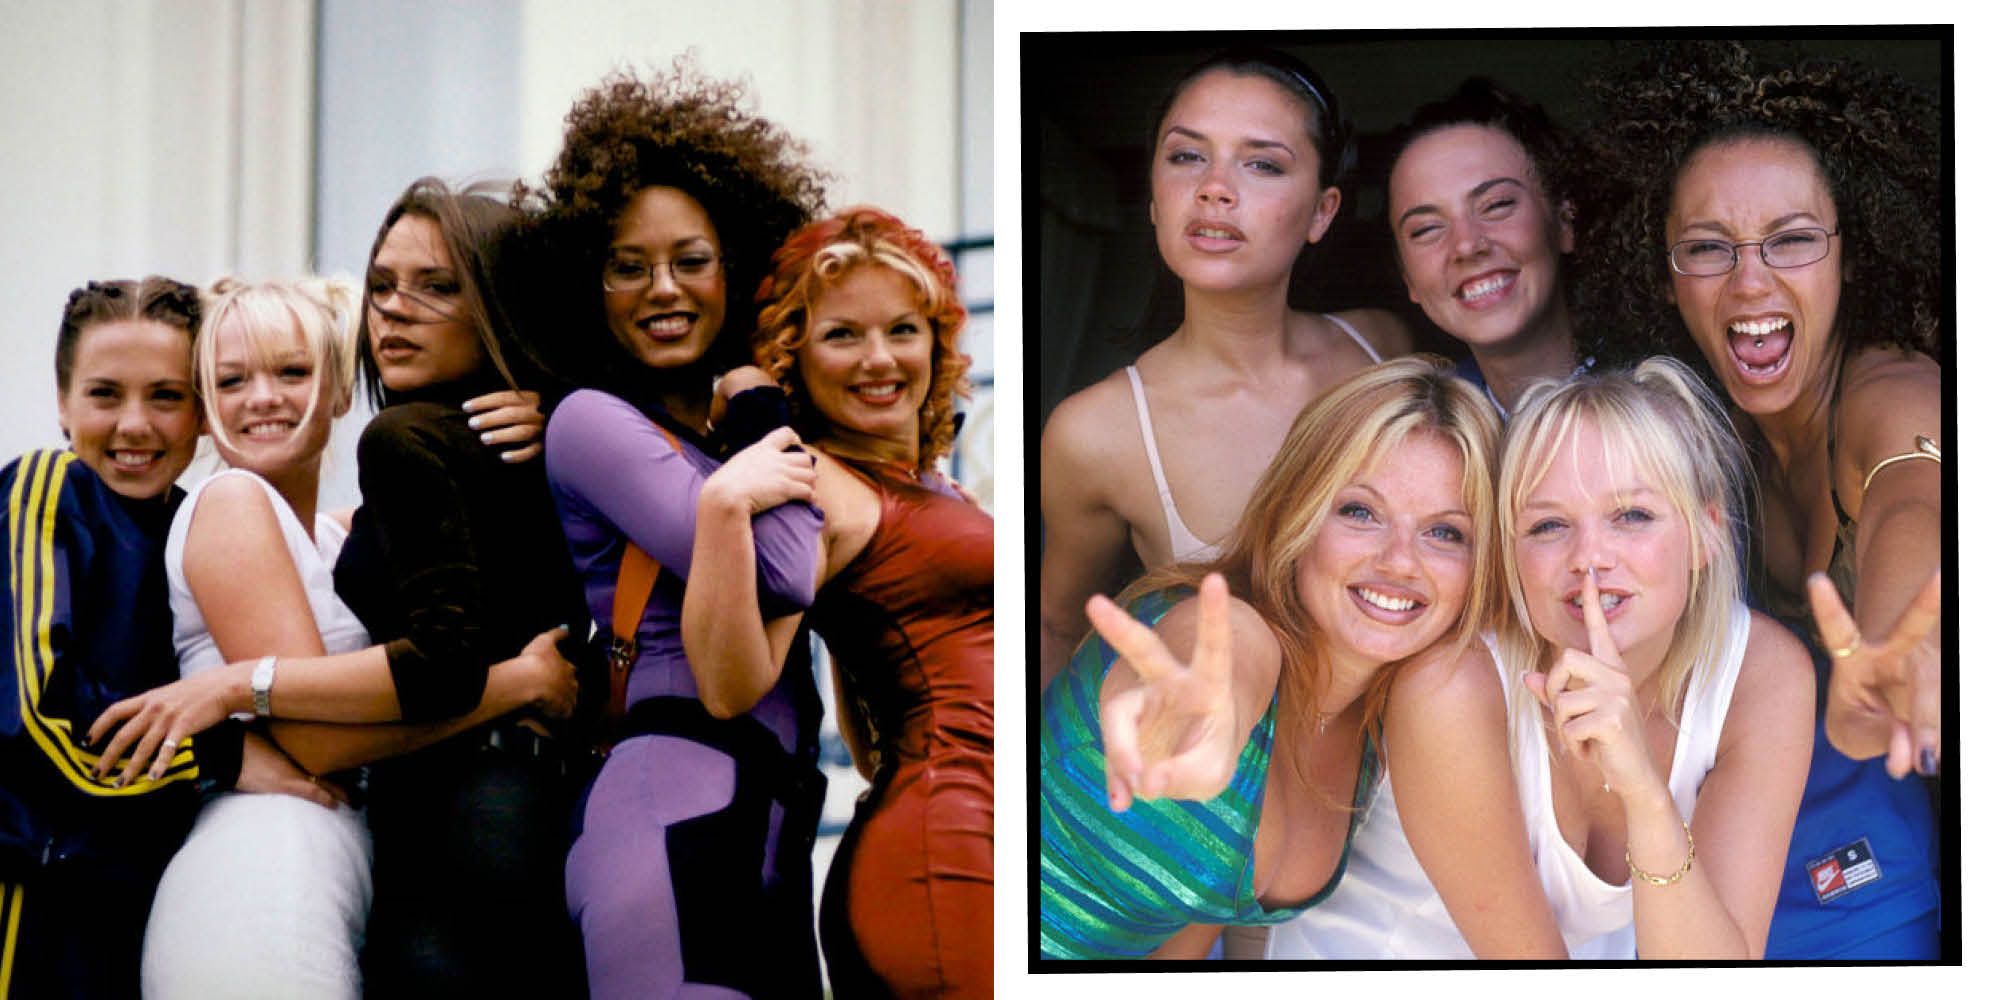 spice girls stage names